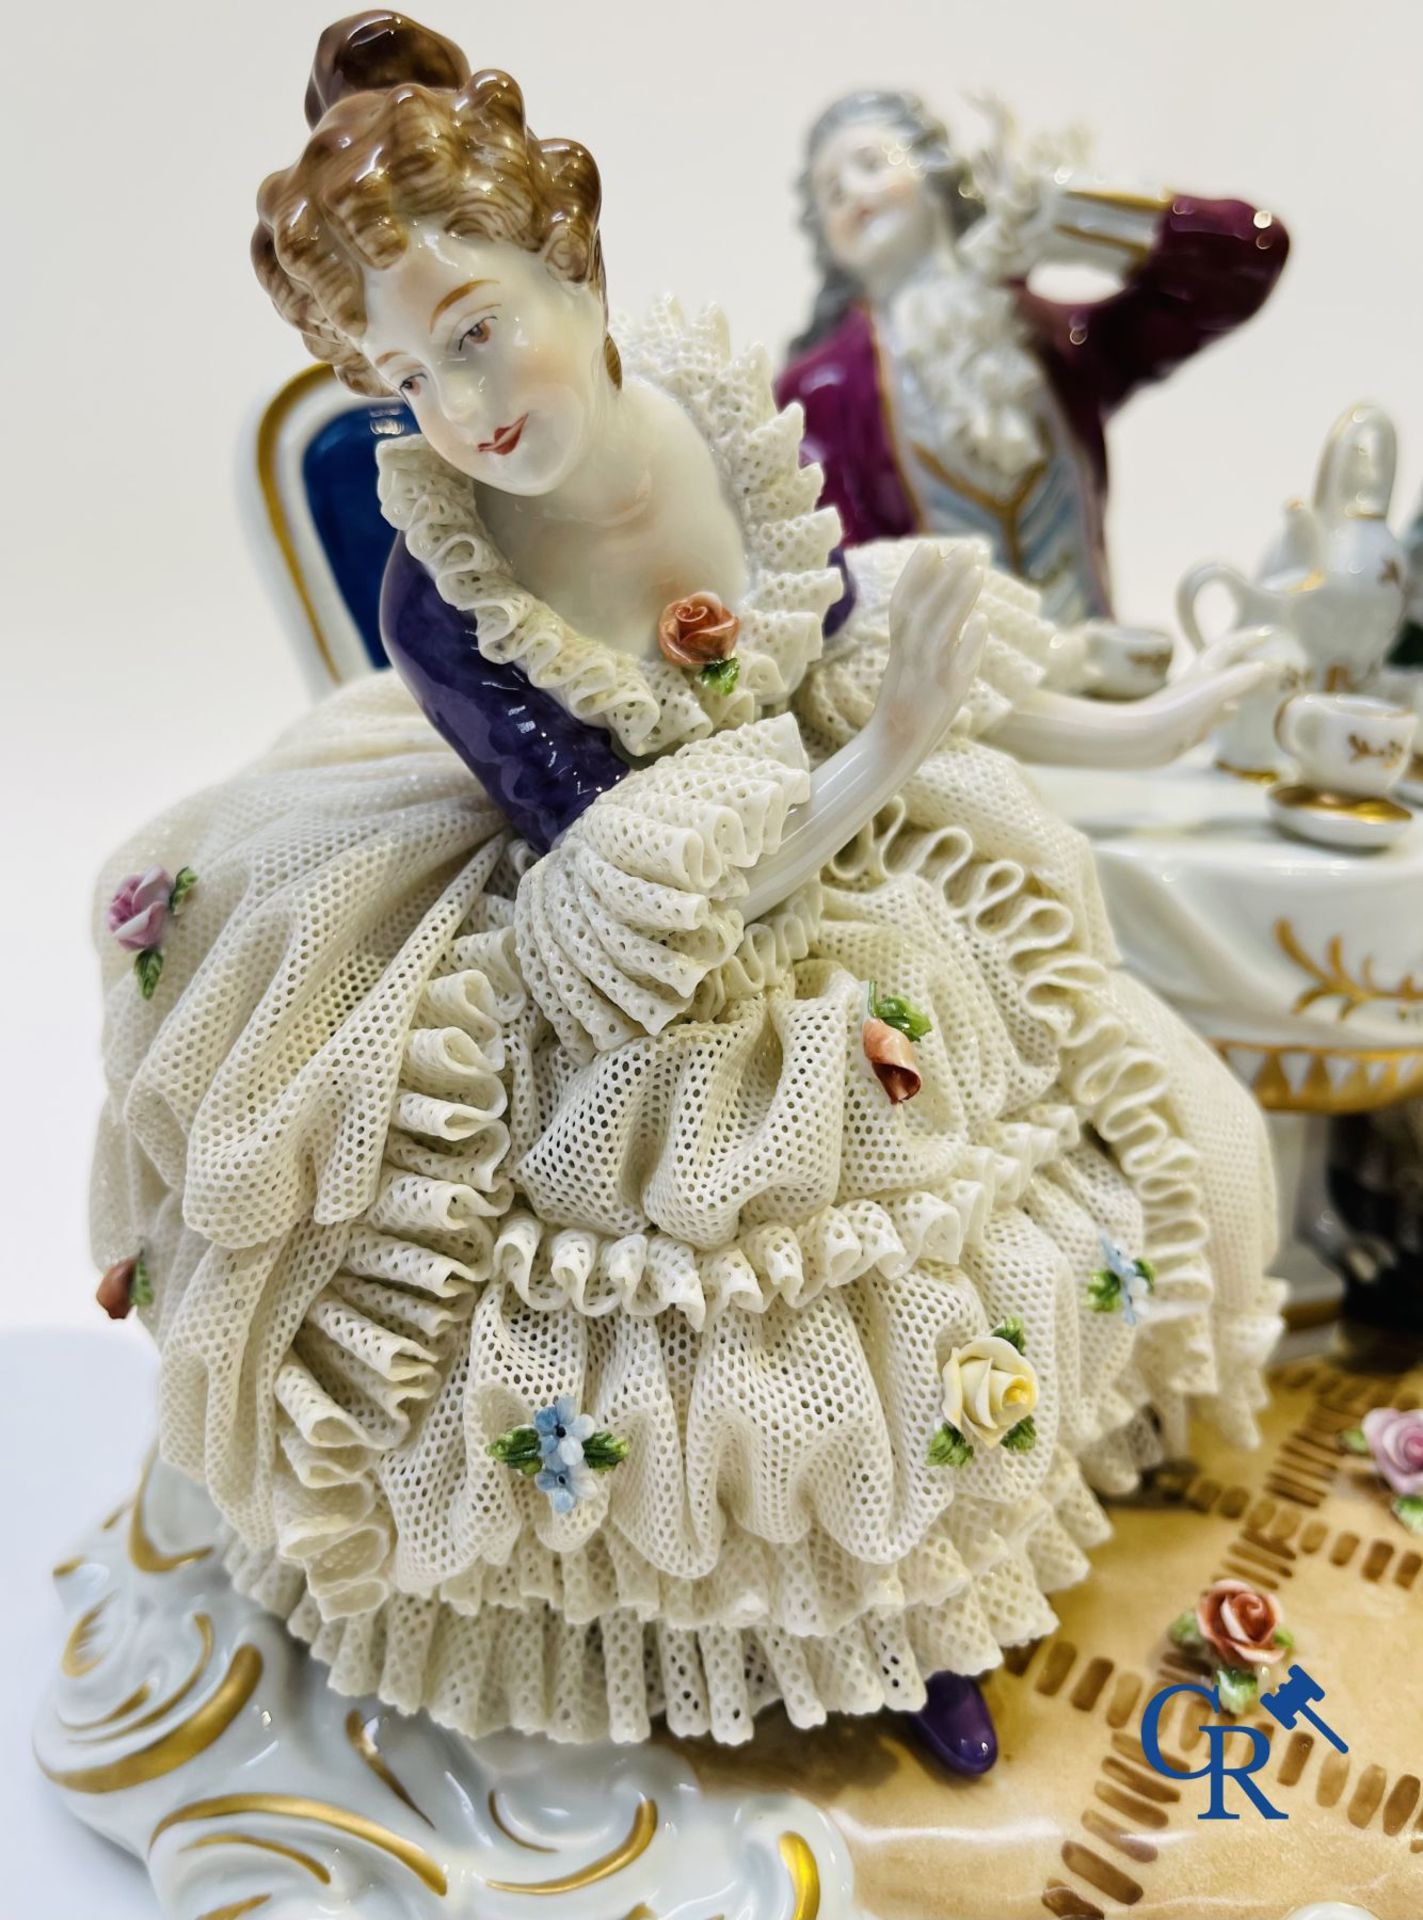 Porcelain: Unterweissbach: "In the tea room". - Image 4 of 9